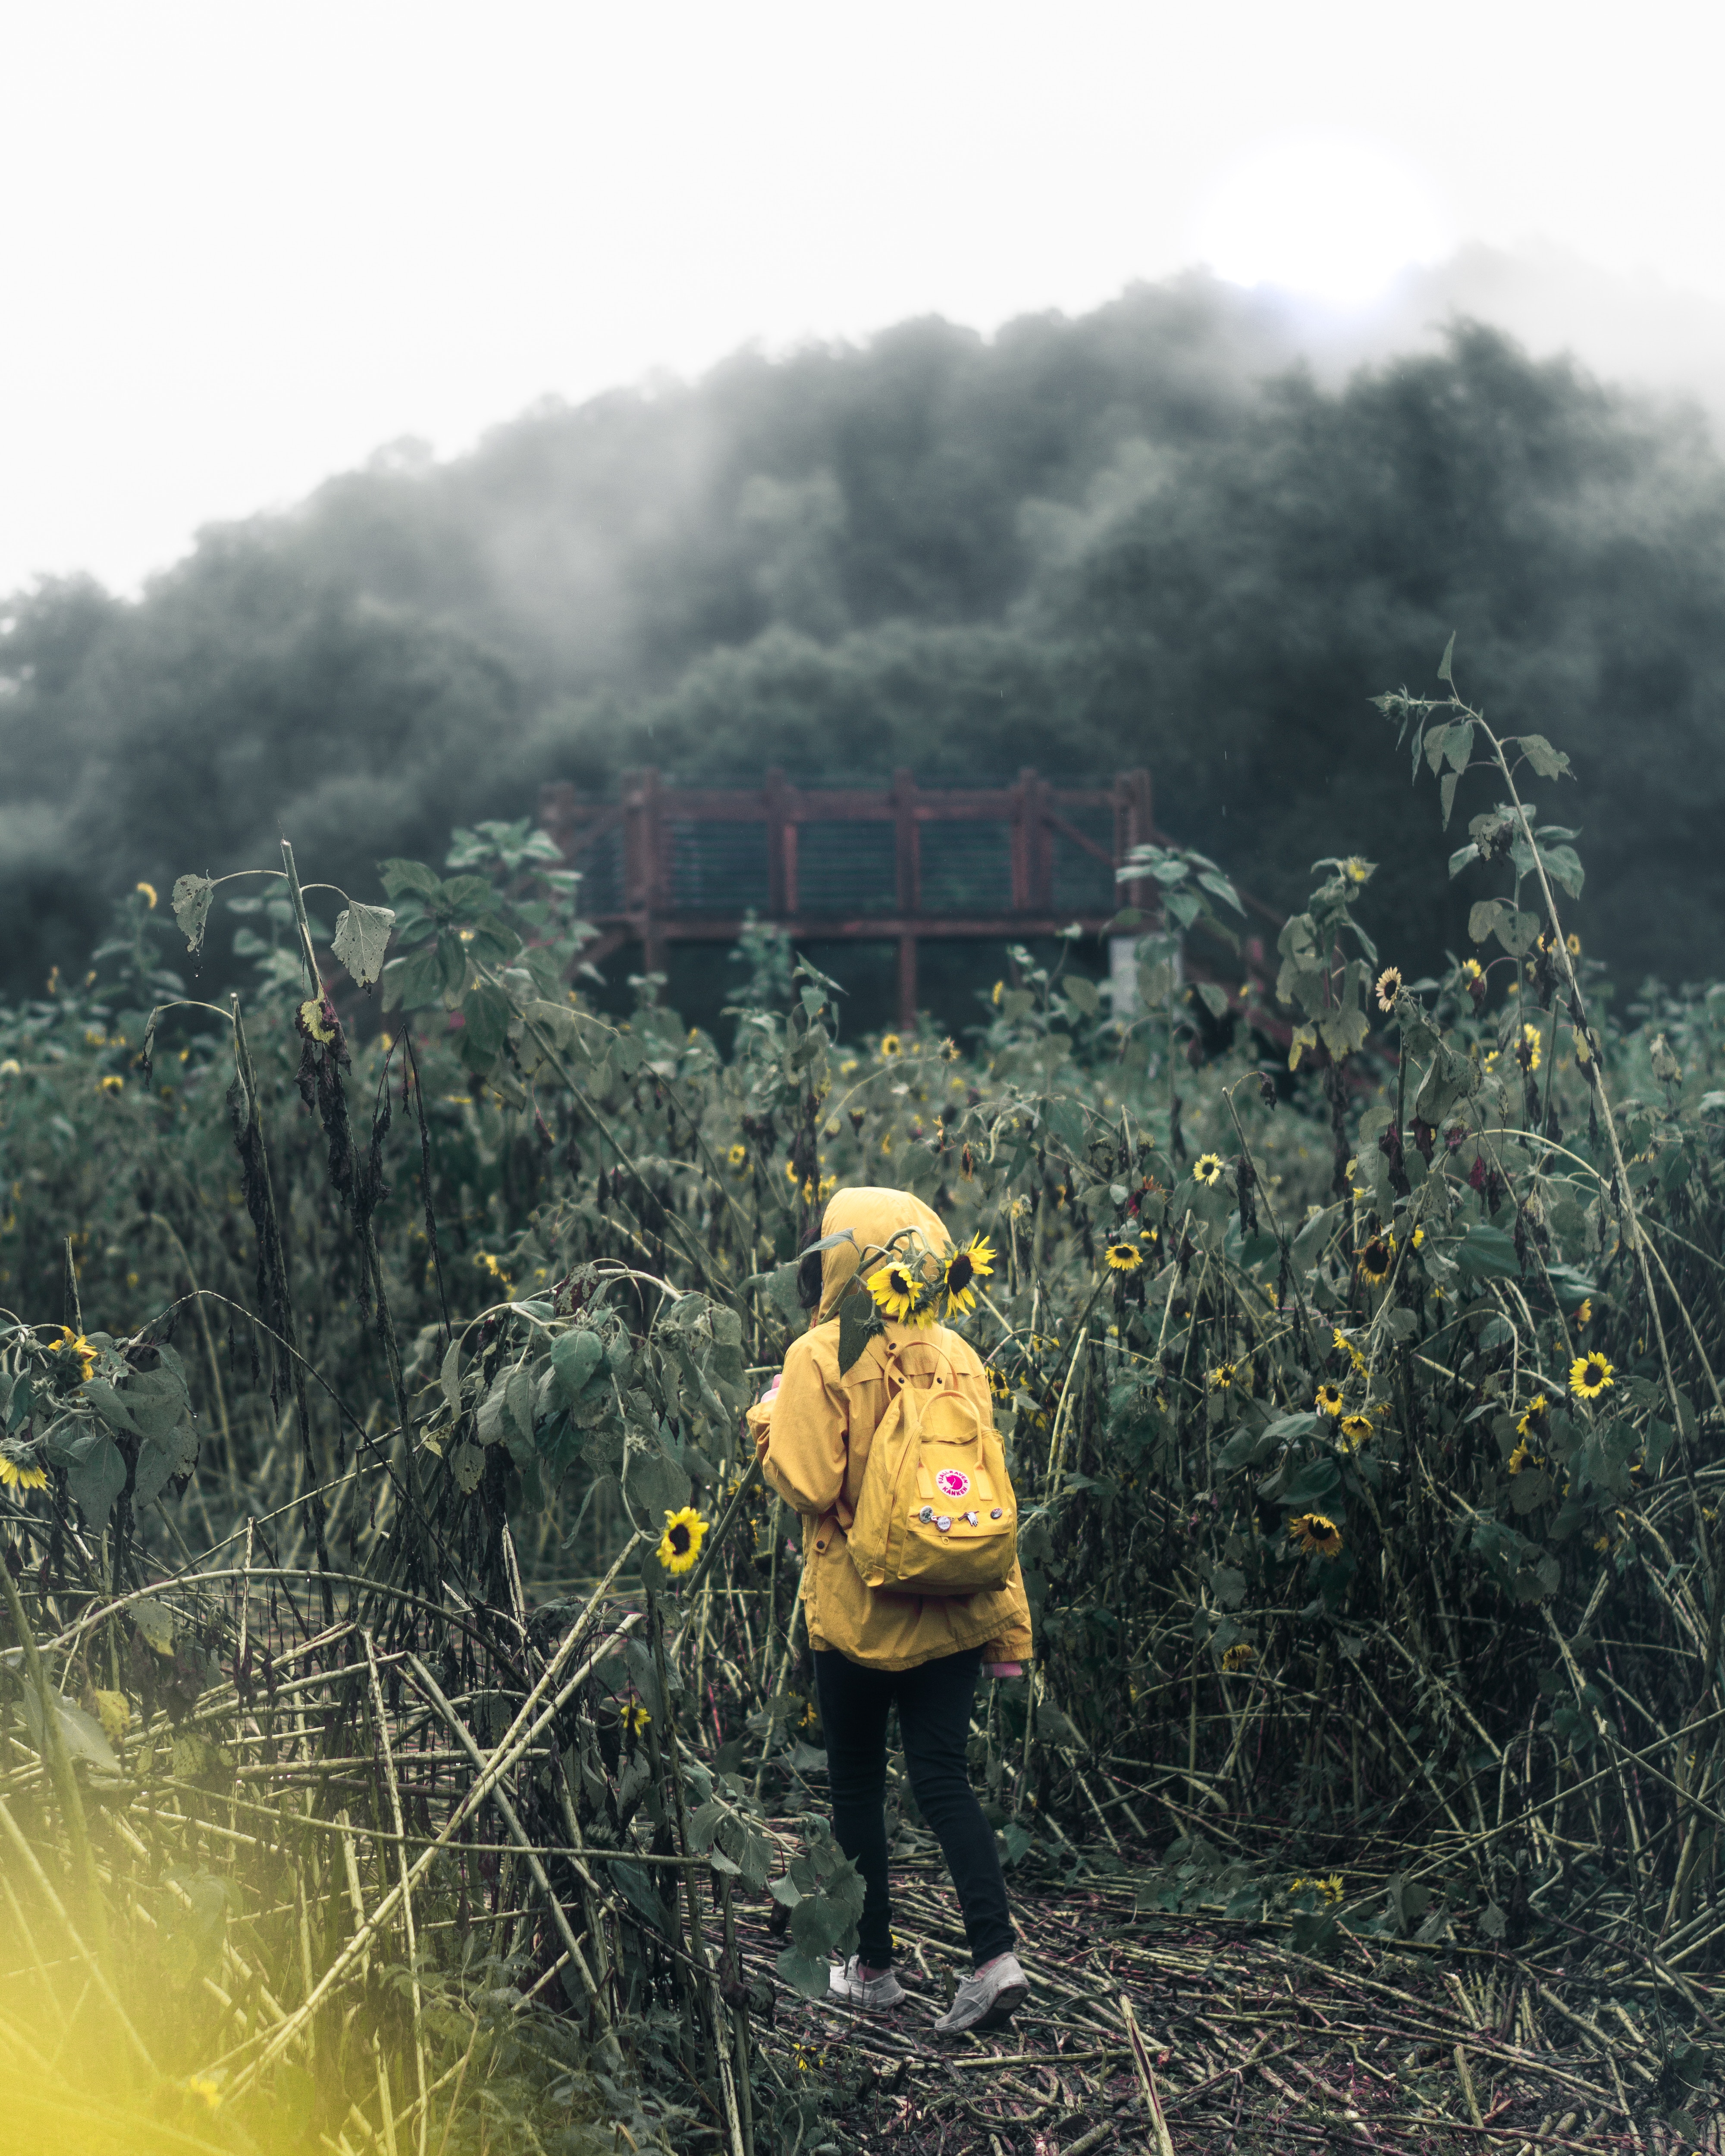 nature, flowers, clouds, field, human, person, mainly cloudy, overcast, backpack, rucksack Panoramic Wallpaper